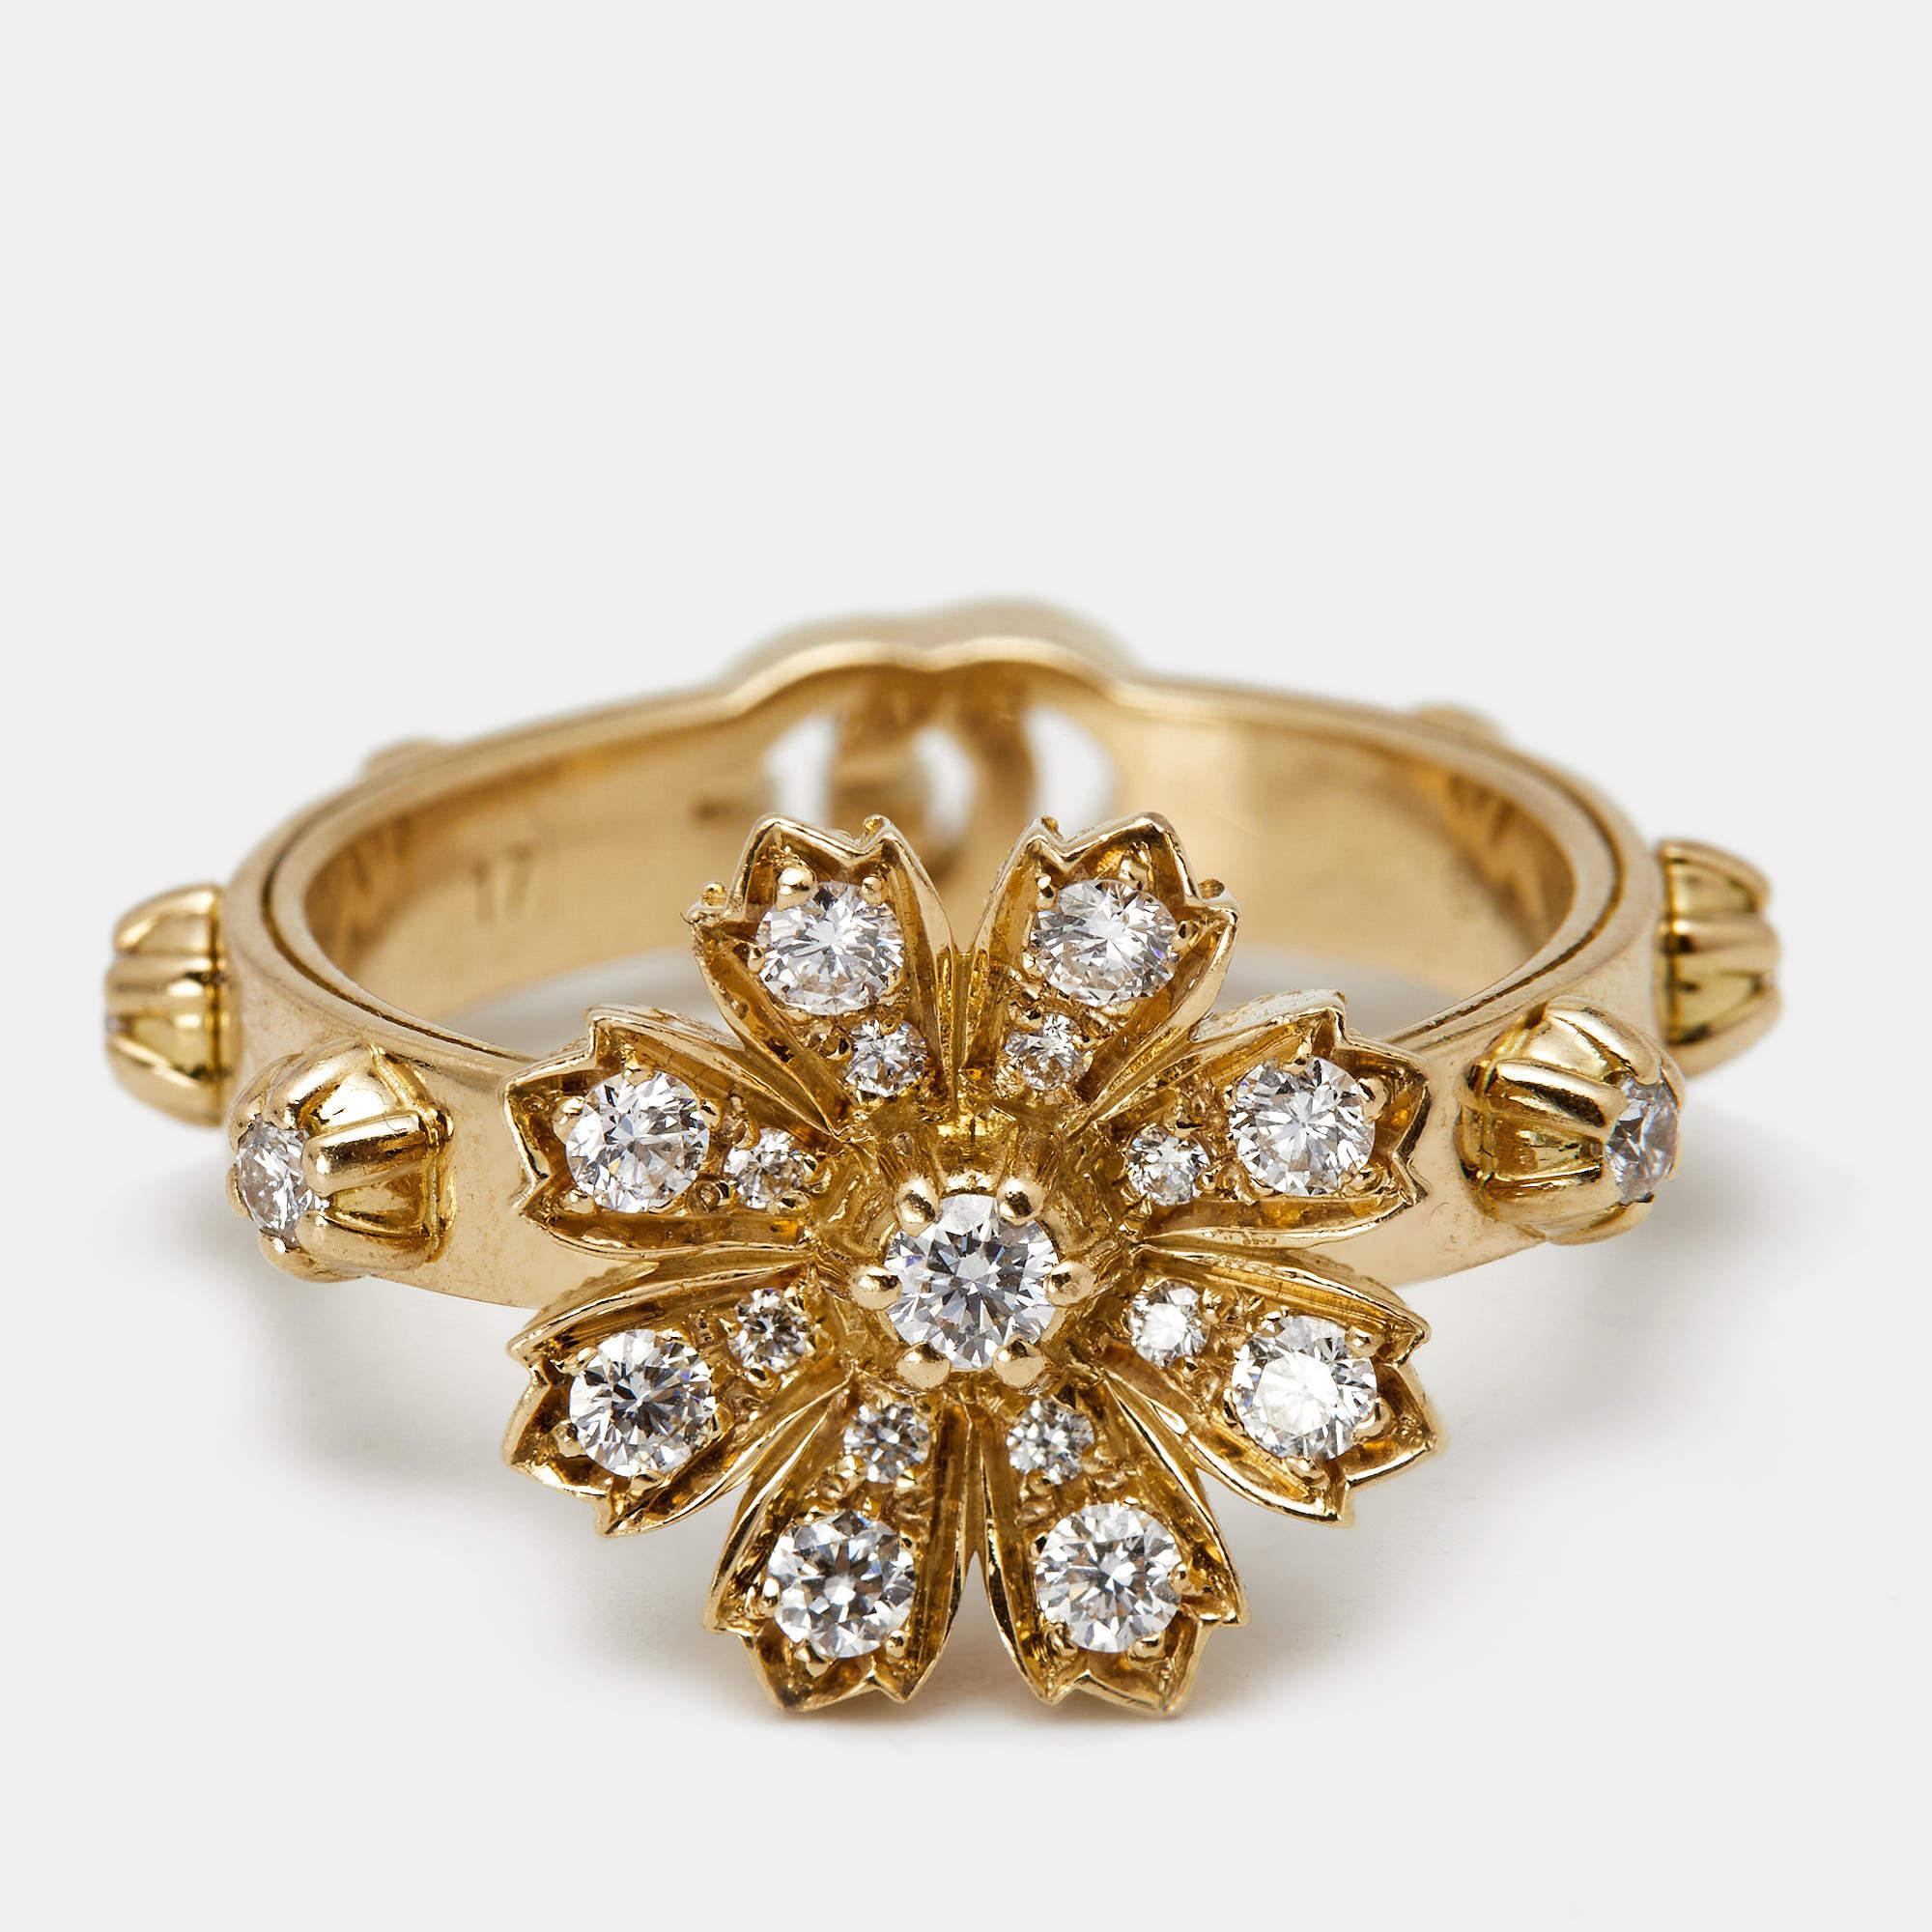 Beautiful and feminine, this ethereal ring is a statement piece designed to punctuate any glamorous ensemble. In line with the brand's chic taste and refined aesthetics, this stunning Flora ring is rendered in 18k yellow gold with a diamond-studded